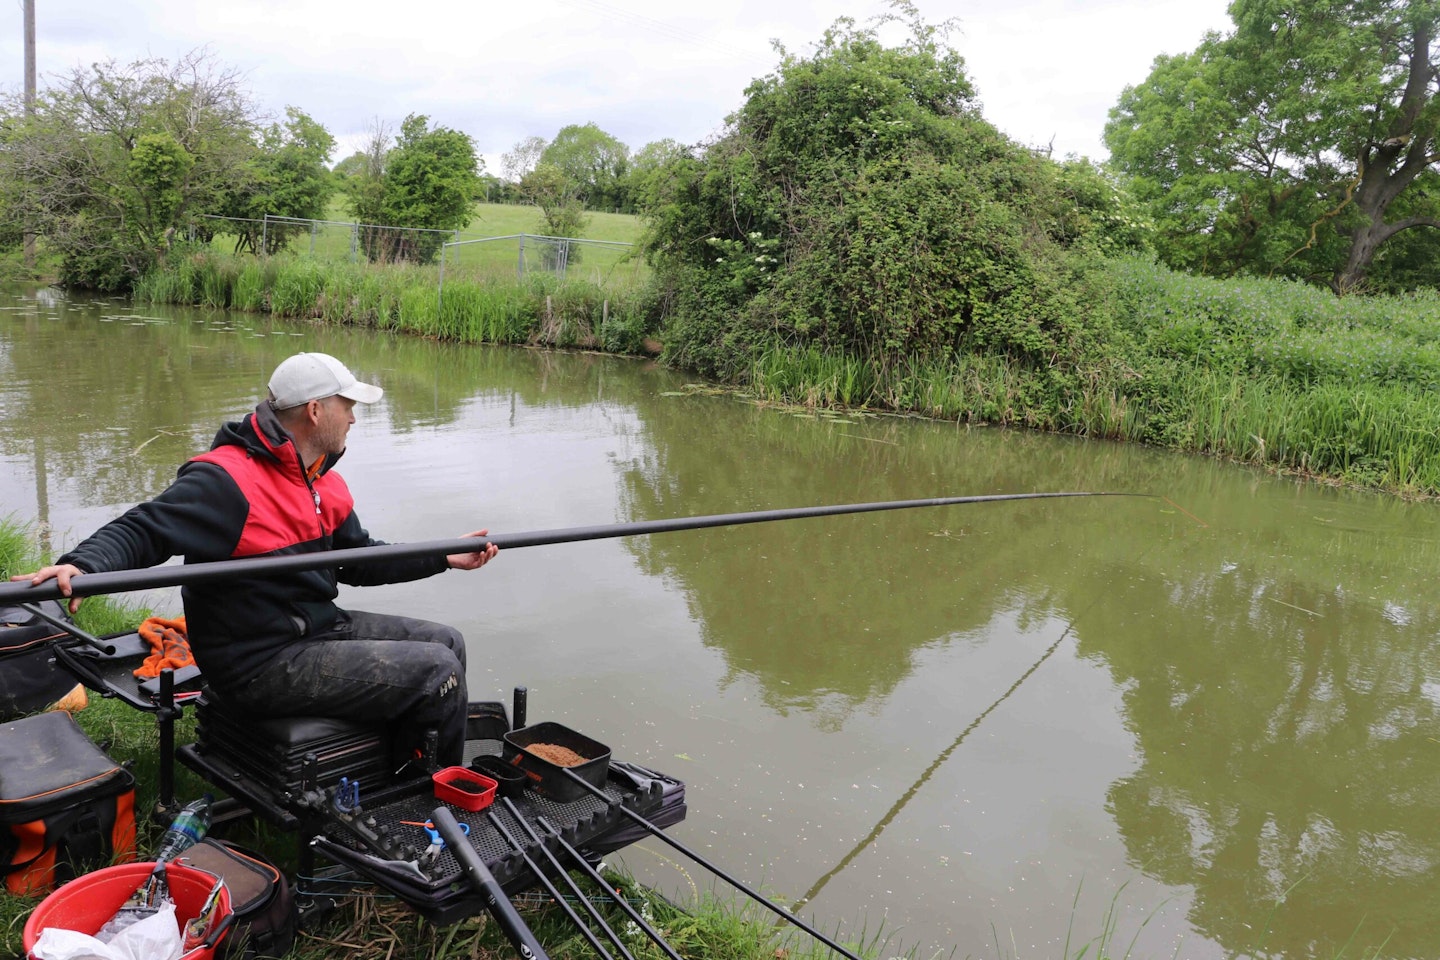 https://images.bauerhosting.com/marketing/sites/2/2022/08/Main-rob-wootton-fishing-GUC-@-Leicester-scaled.jpg?auto=format&w=1440&q=80